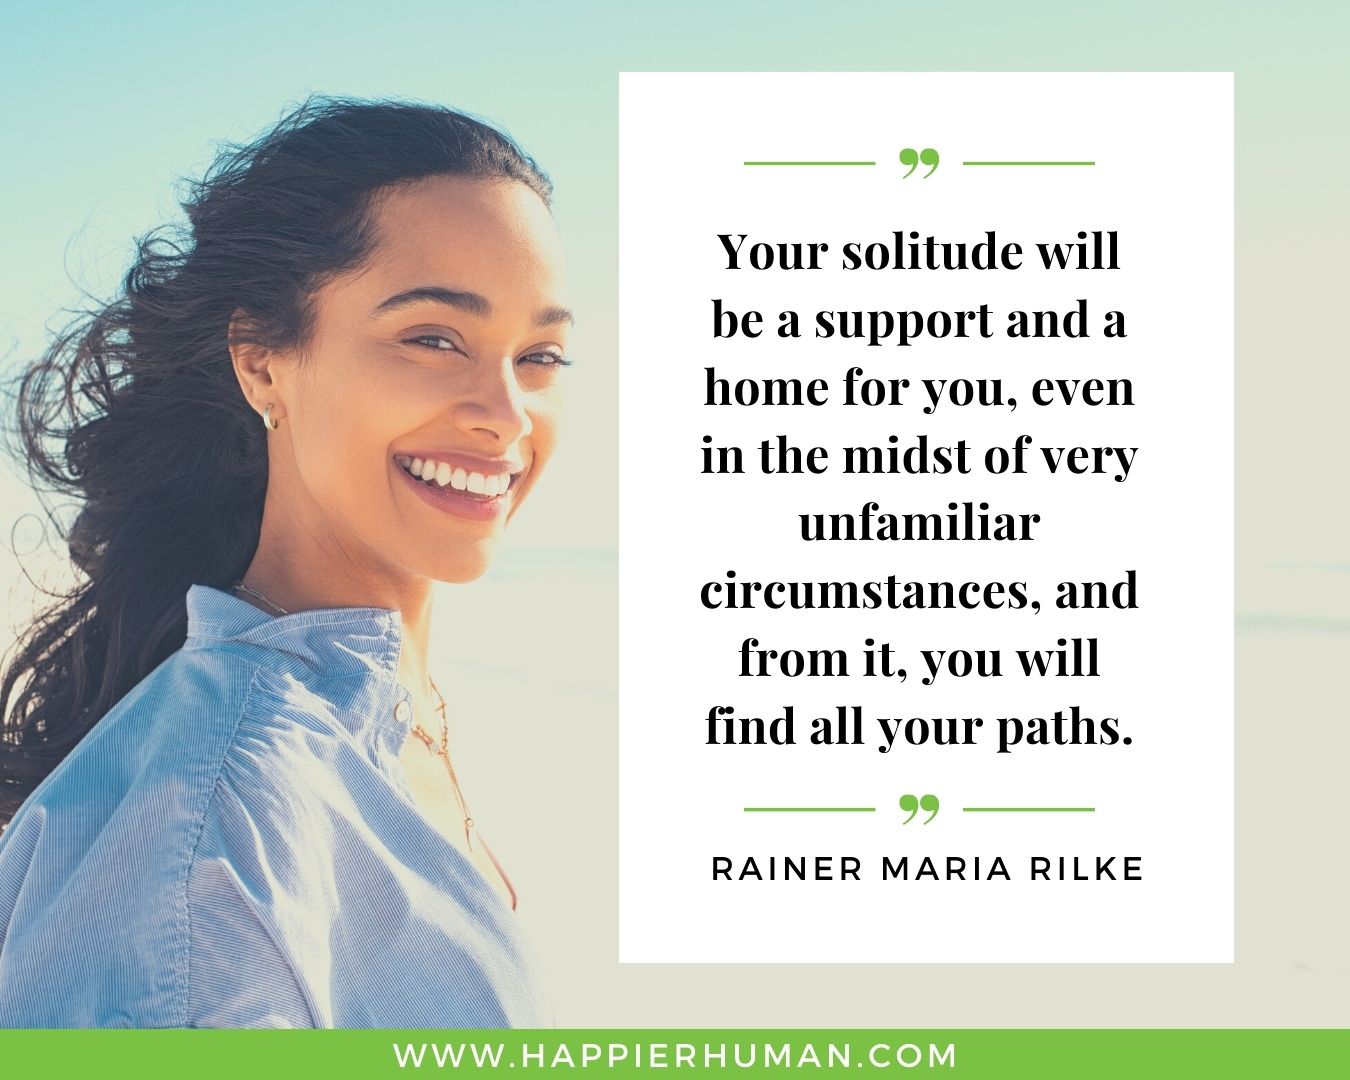 Introvert Quotes - “Your solitude will be a support and a home for you, even in the midst of very unfamiliar circumstances, and from it, you will find all your paths.” – Rainer Maria Rilke